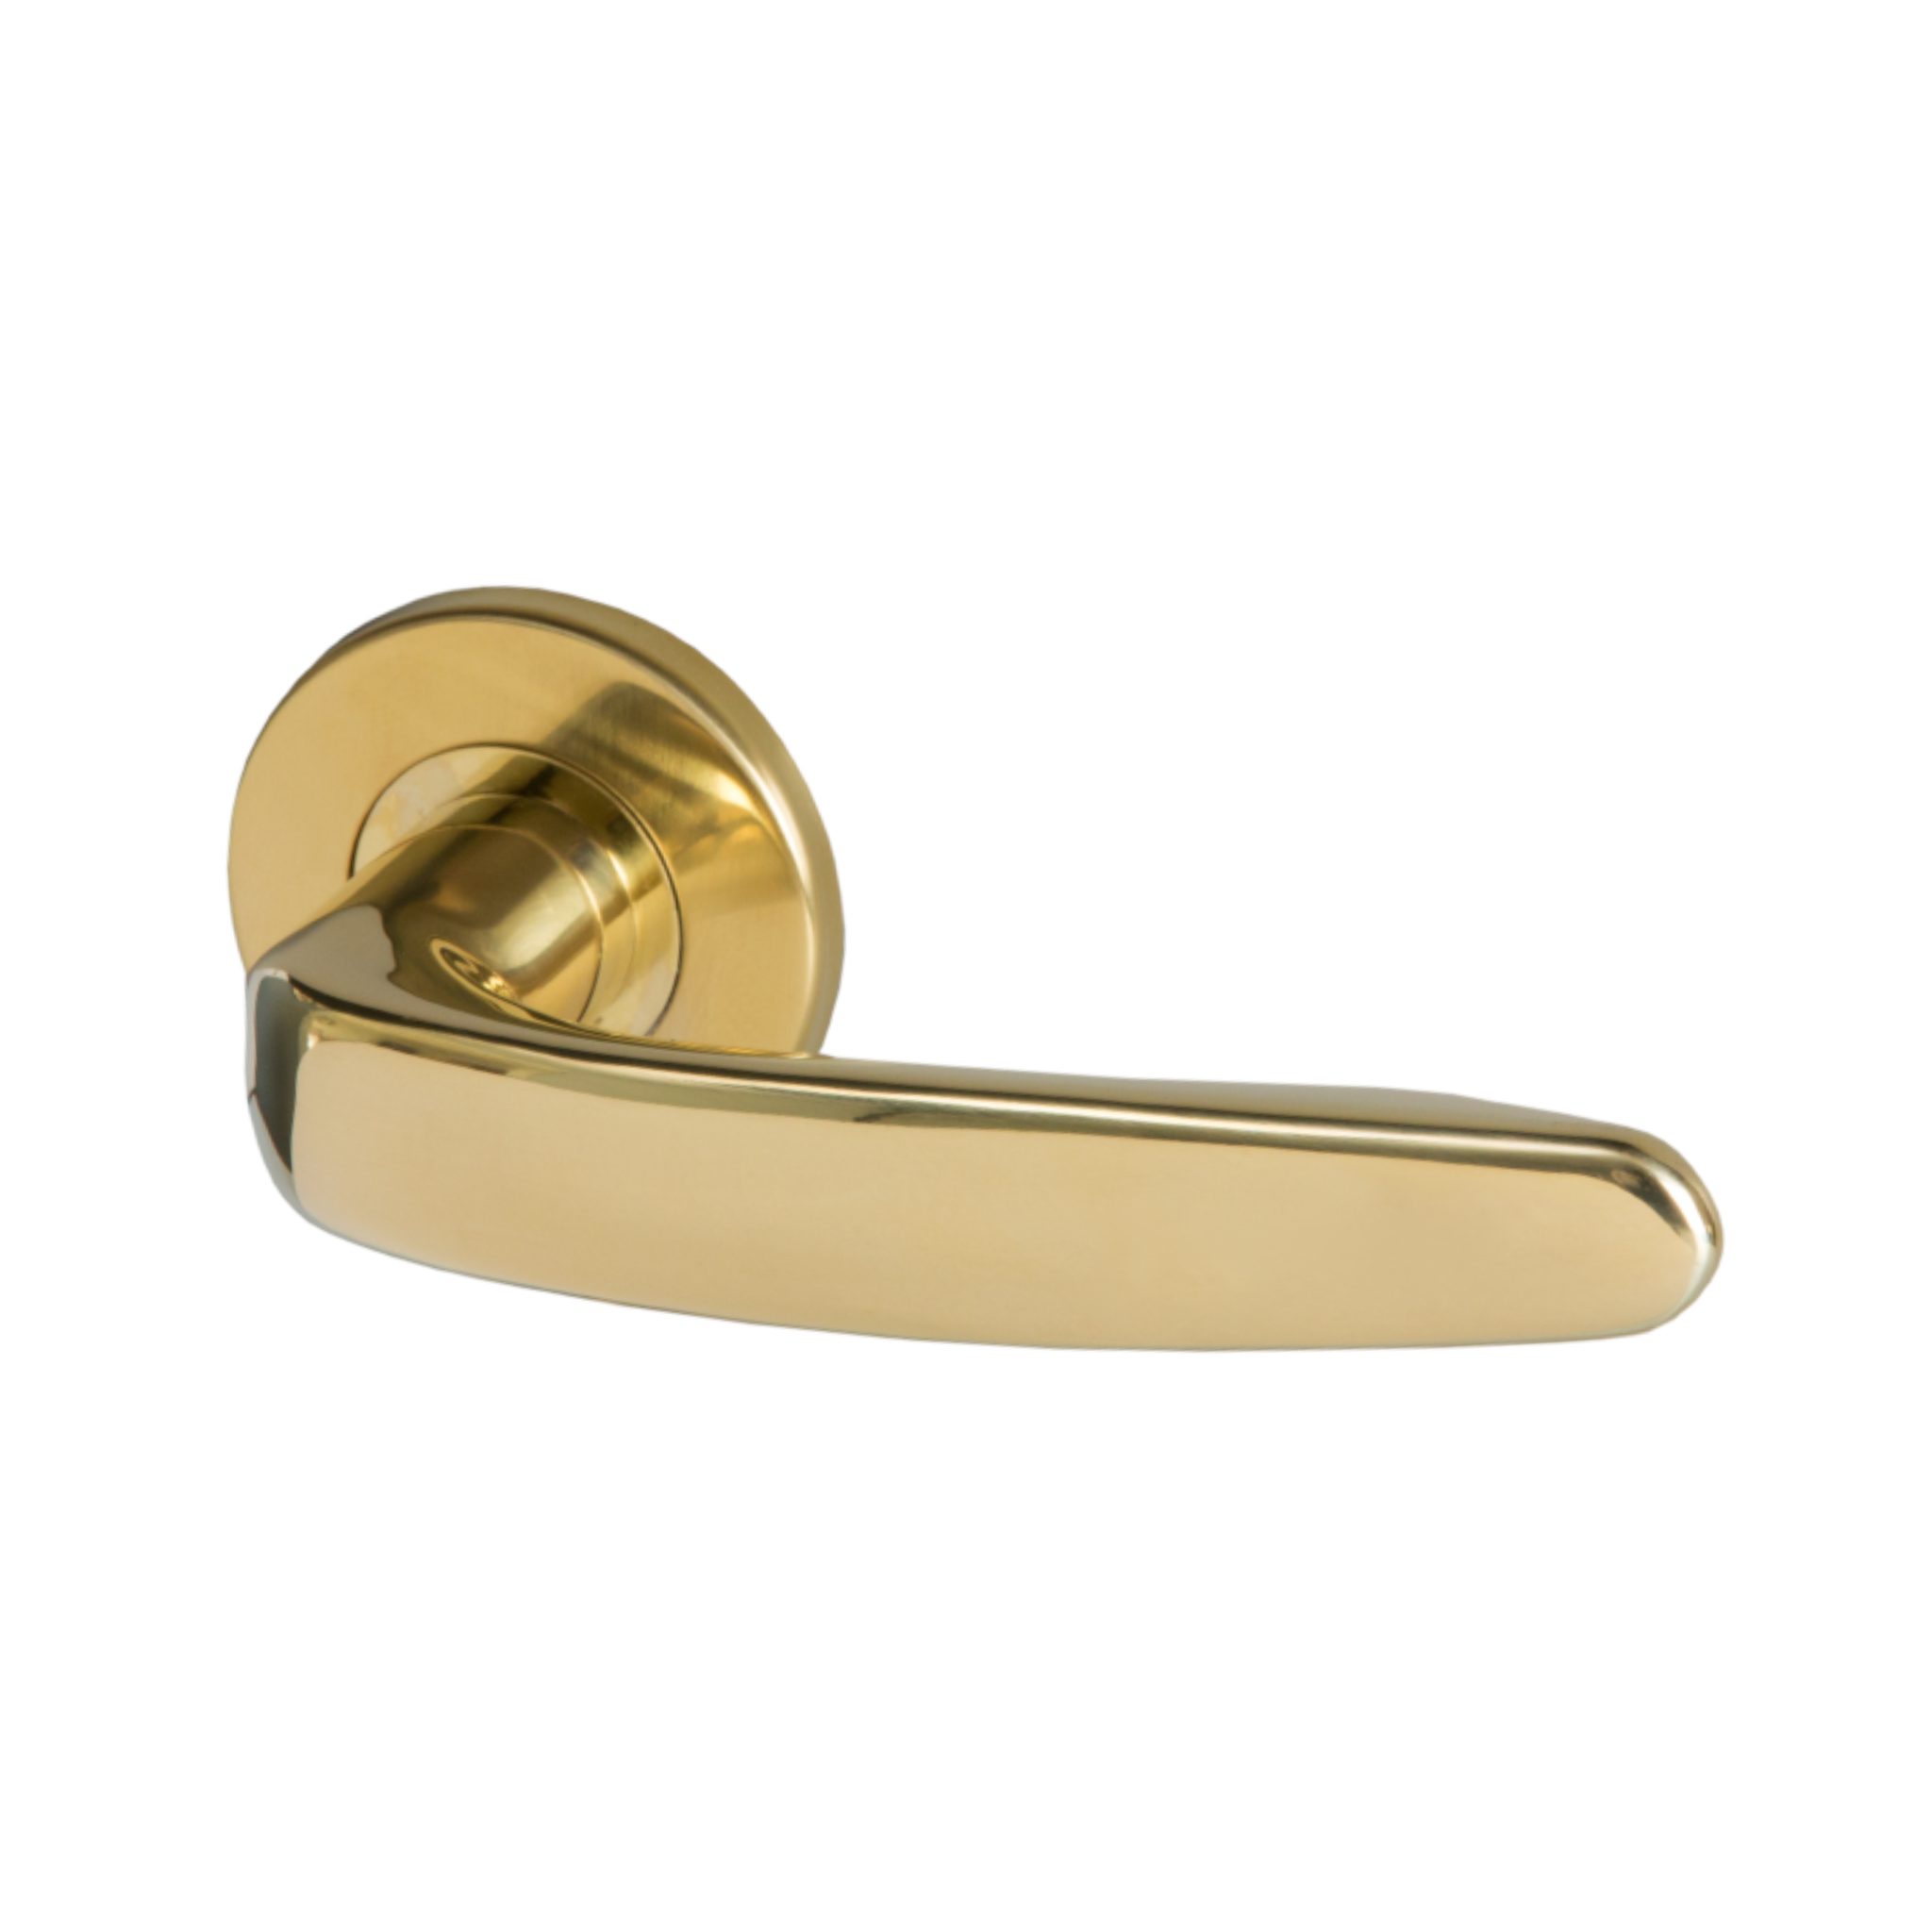 Skein PVD, Lever Handles, Form, On Round Rose, With Escutcheons, PVD Brass, QS